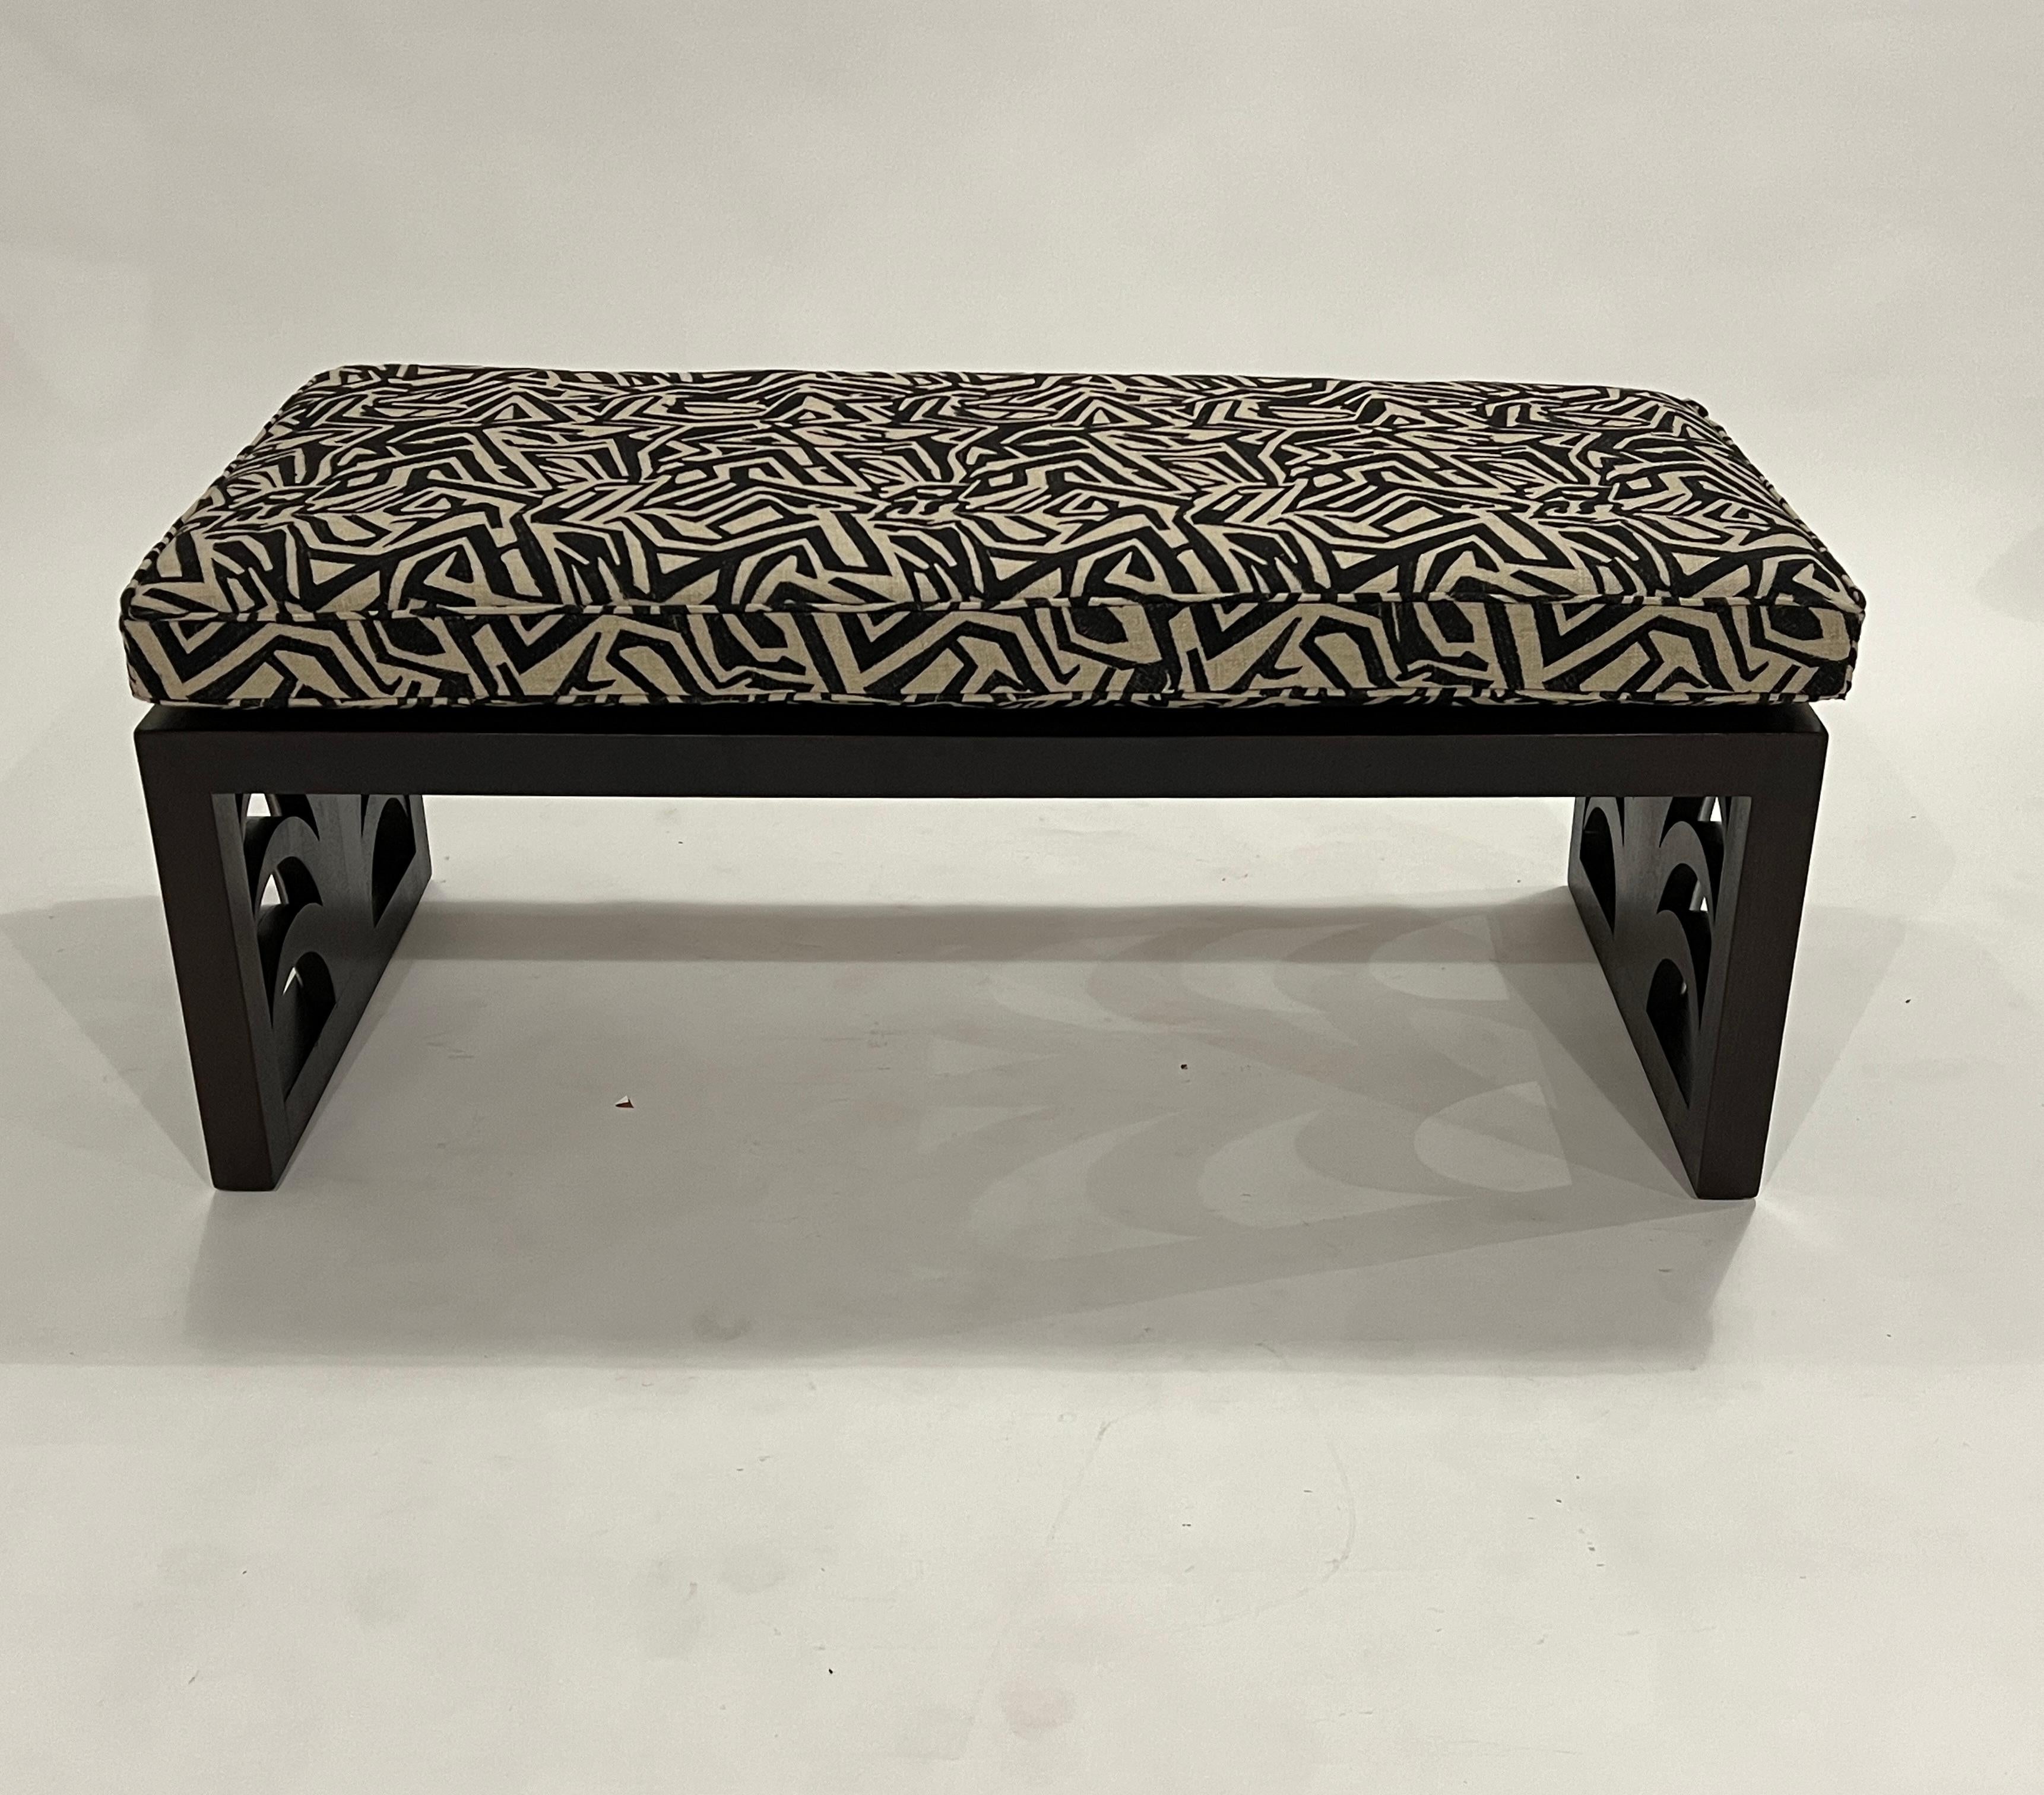 Mid-century mahogany coffee table designed by T.H. Robsjohn Gibbings for Widdicomb. This cocktail table design features a palm leaf motif on the ends and has been reinvented to include a bench cushion upholstered in a tribal pattern of cream and